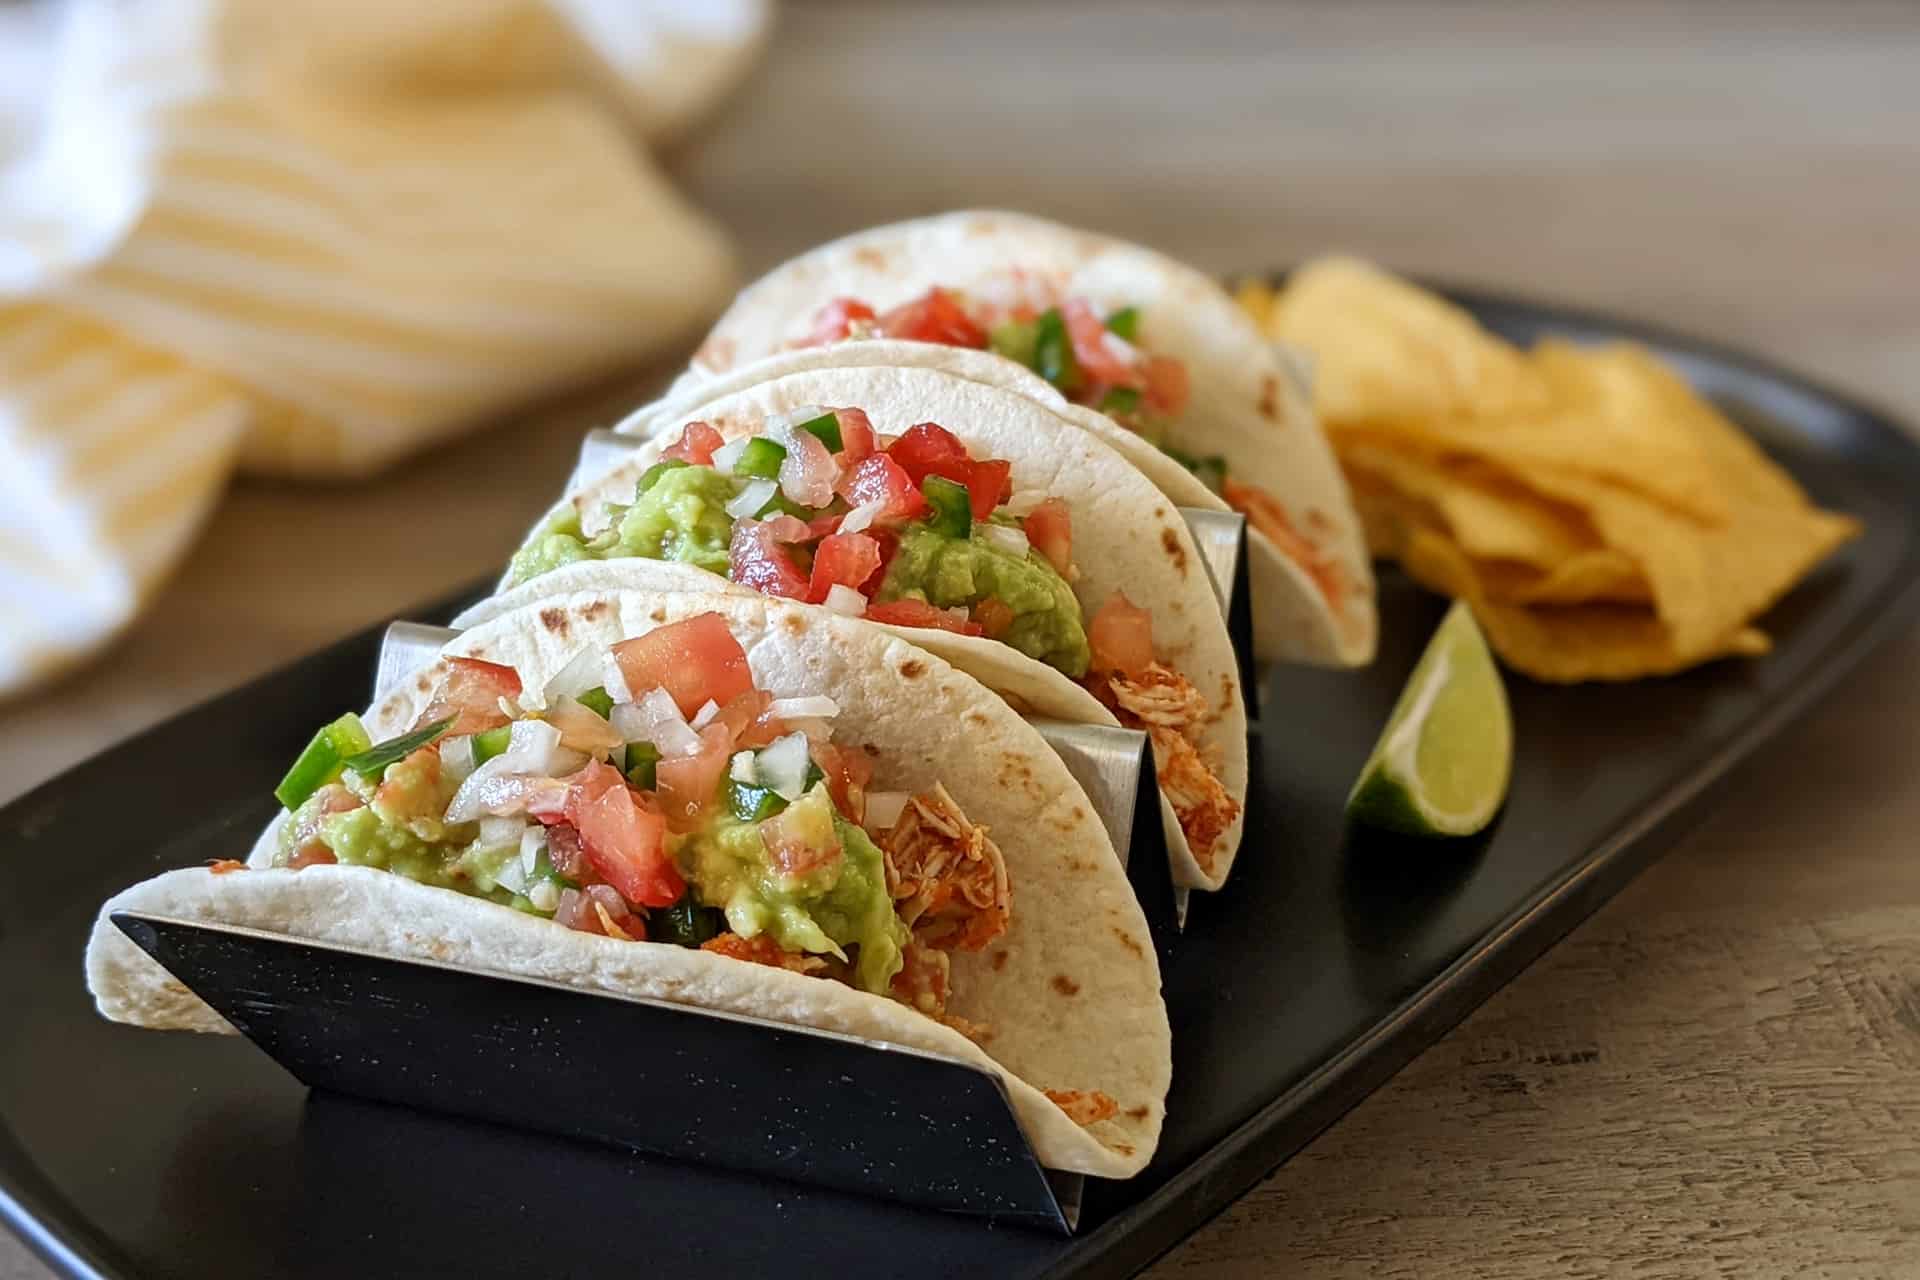 A plate of shredded chicken tacos with pico de gallo and guacamole